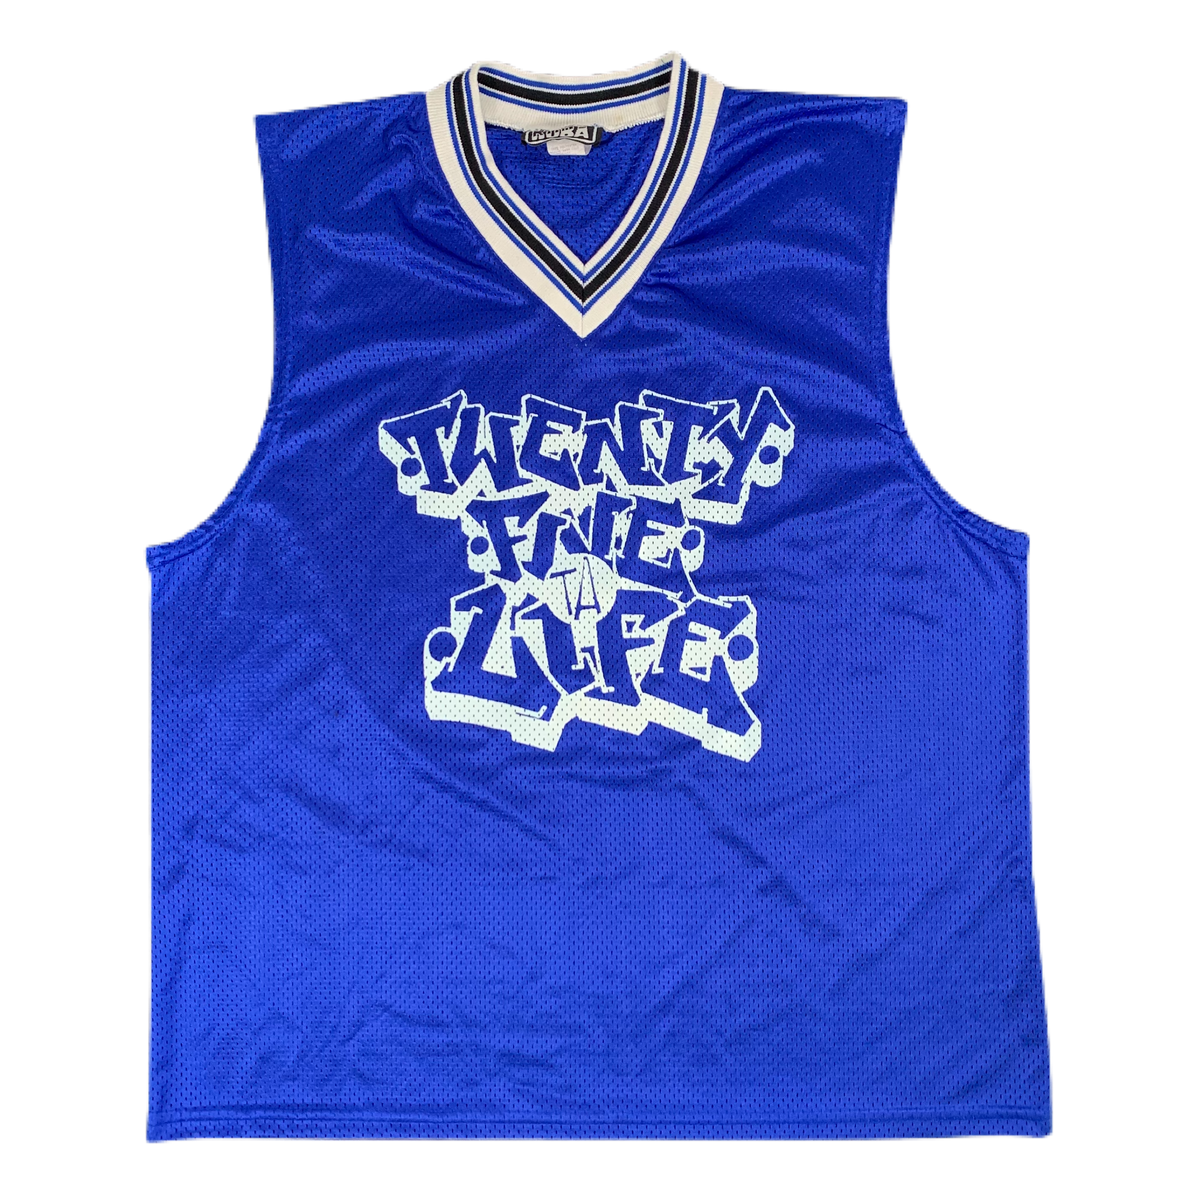 Vintage 25 Ta Life &quot;Keepin It Real&quot; Basketball Jersey